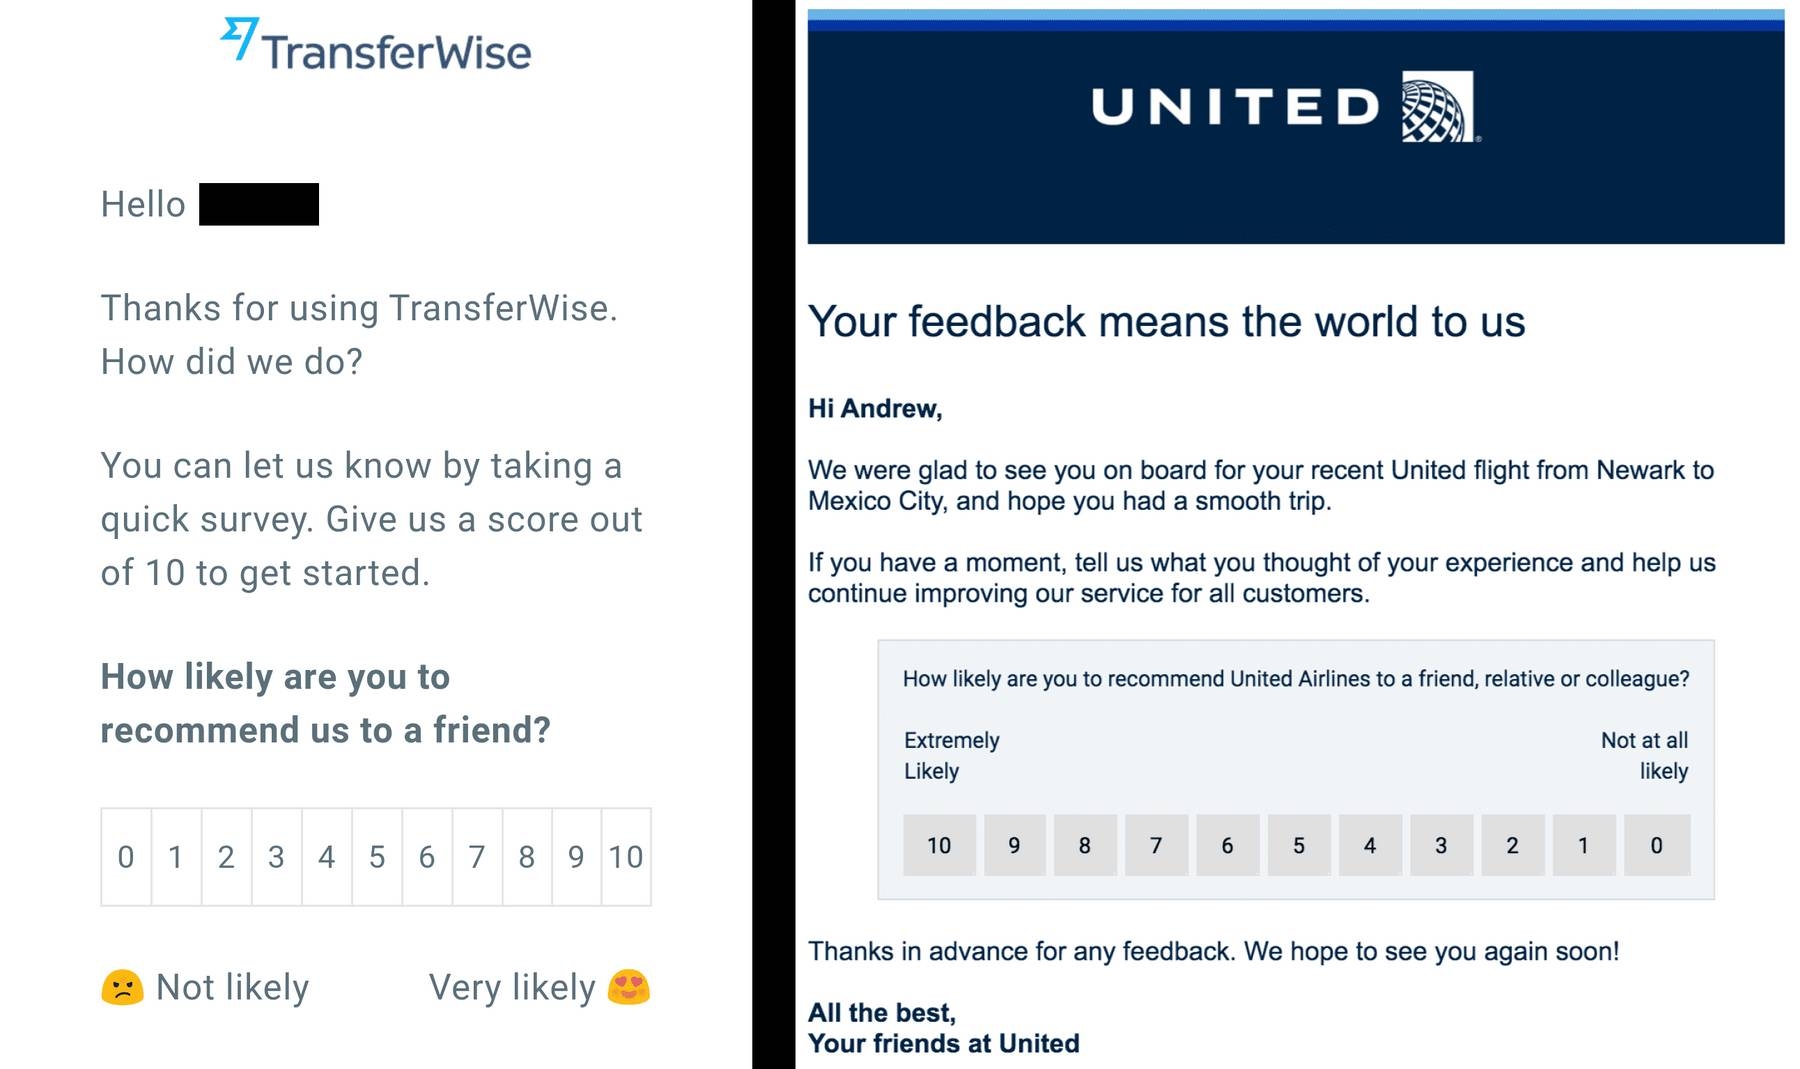 Closed-ended customer feedback survey from United Airlines and TransferWire